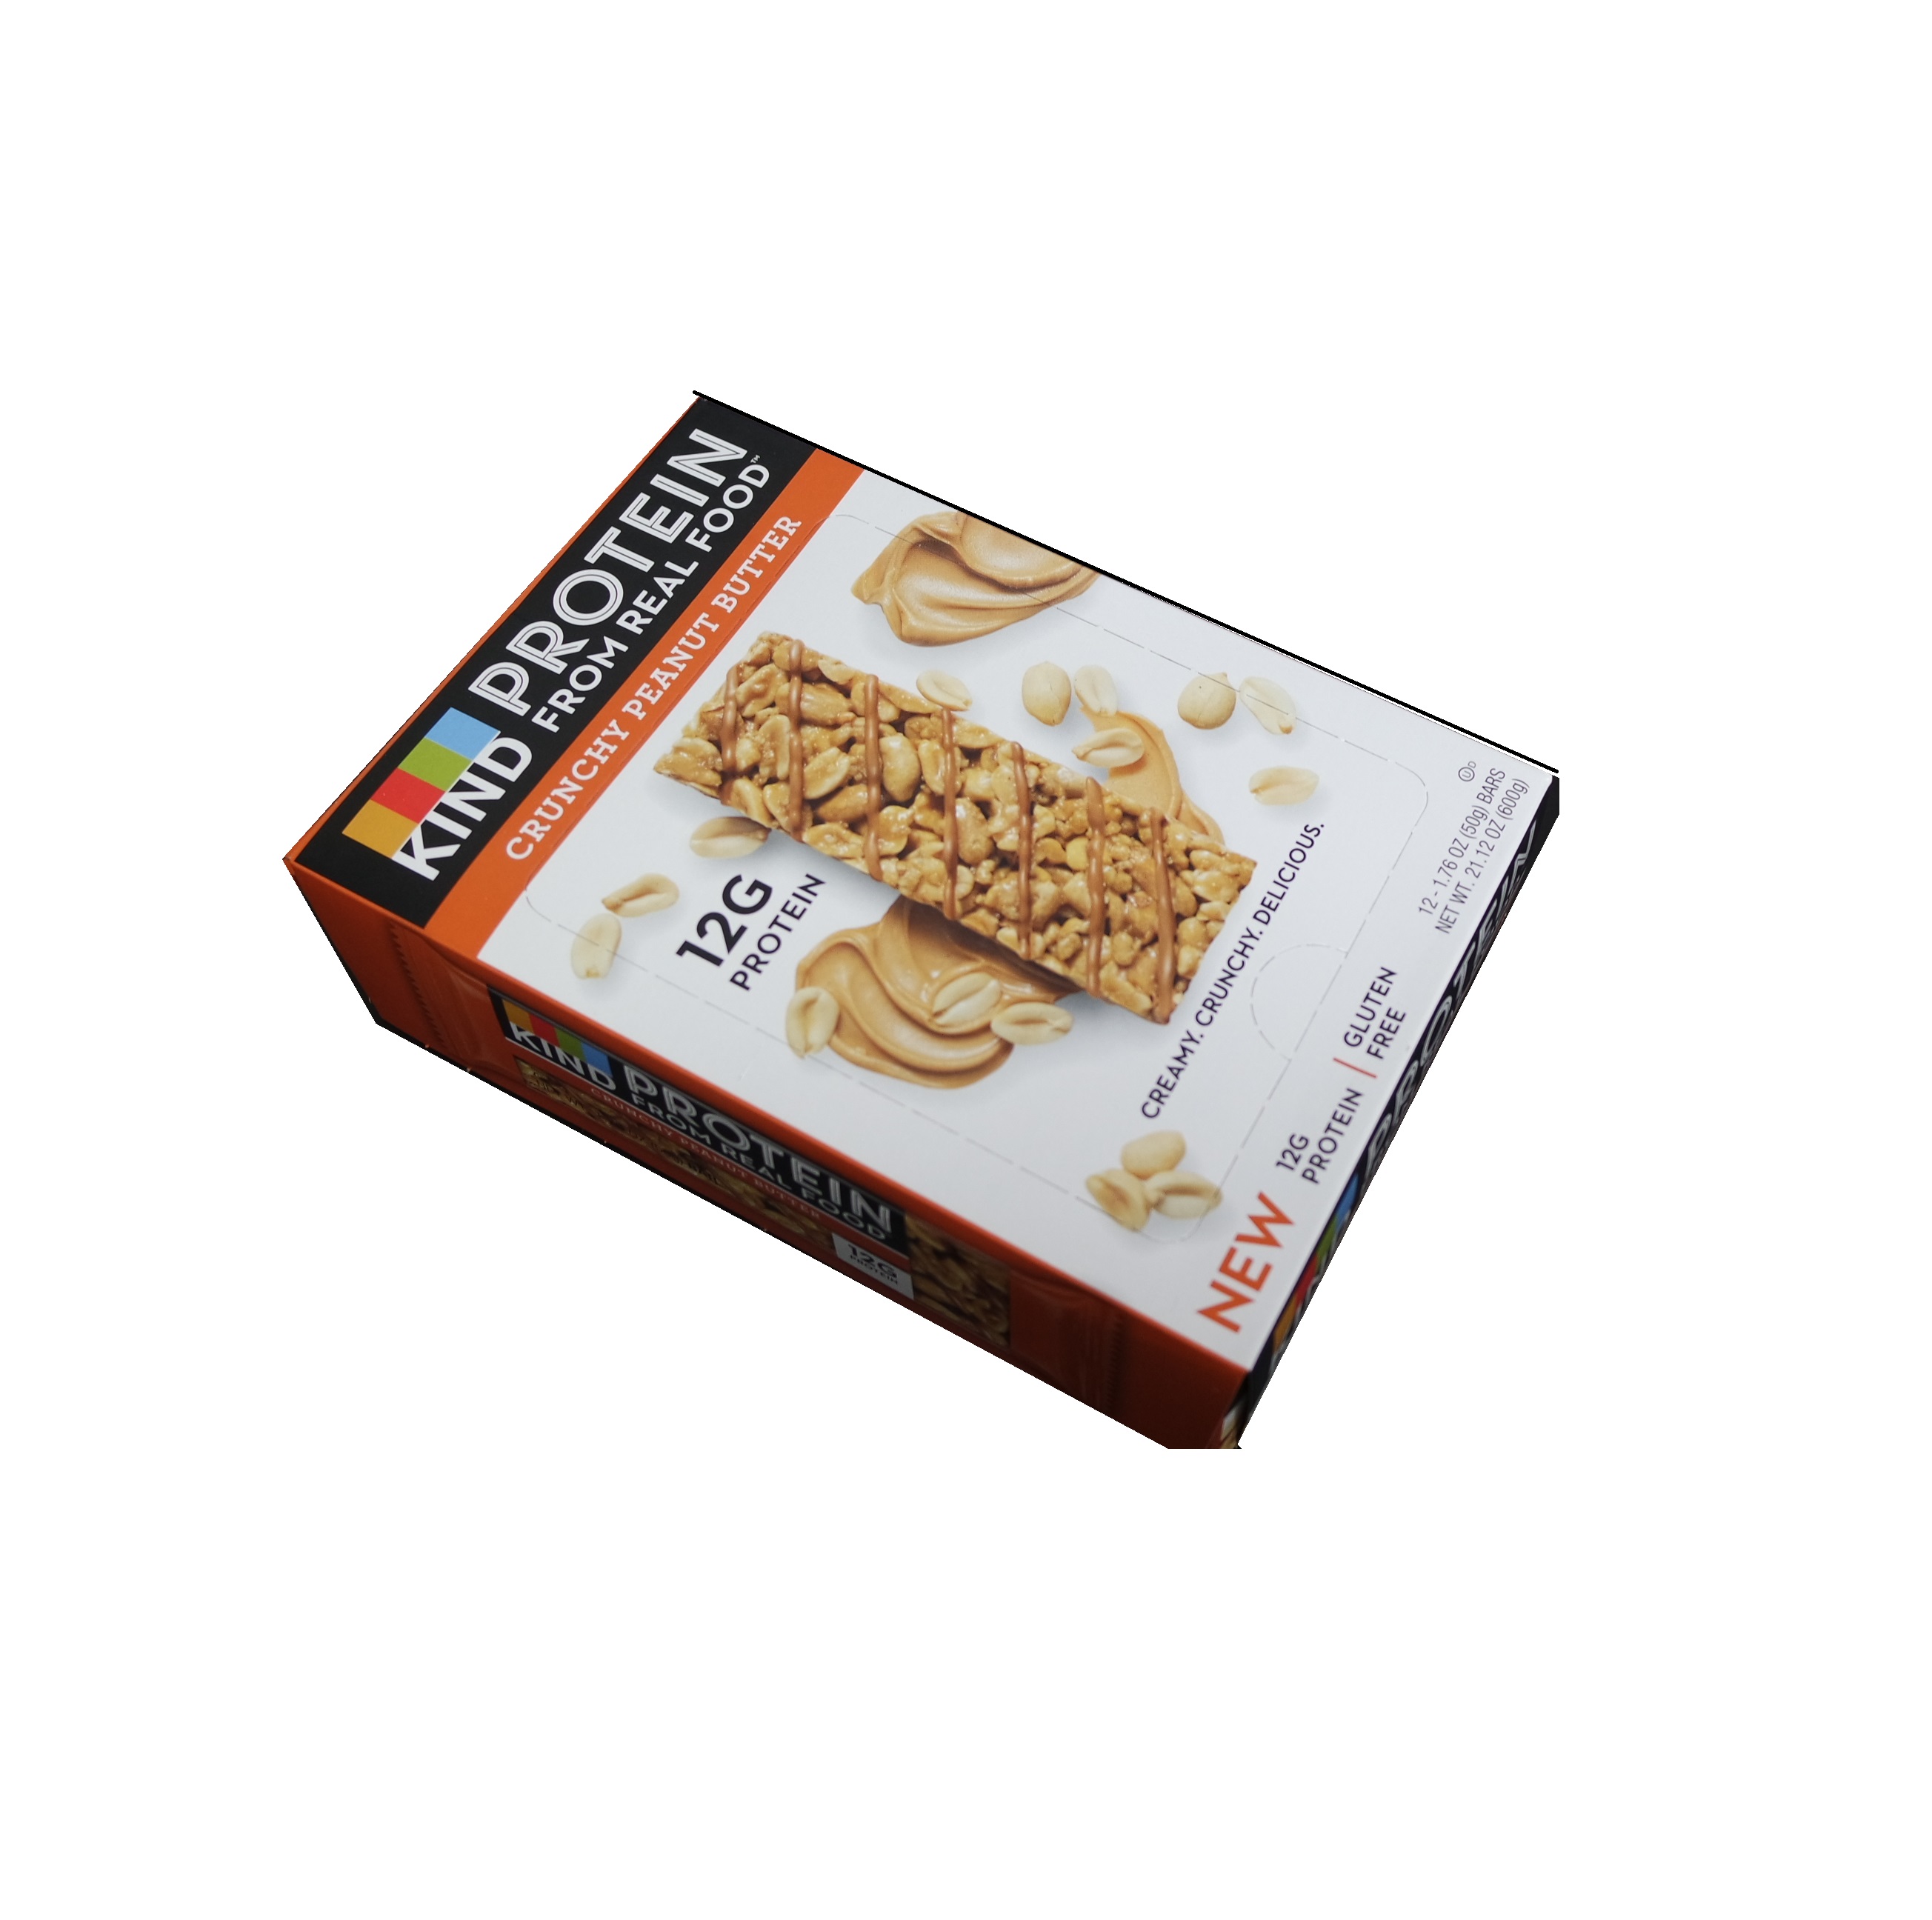 Kind crunchy peanut butter protein 12ct